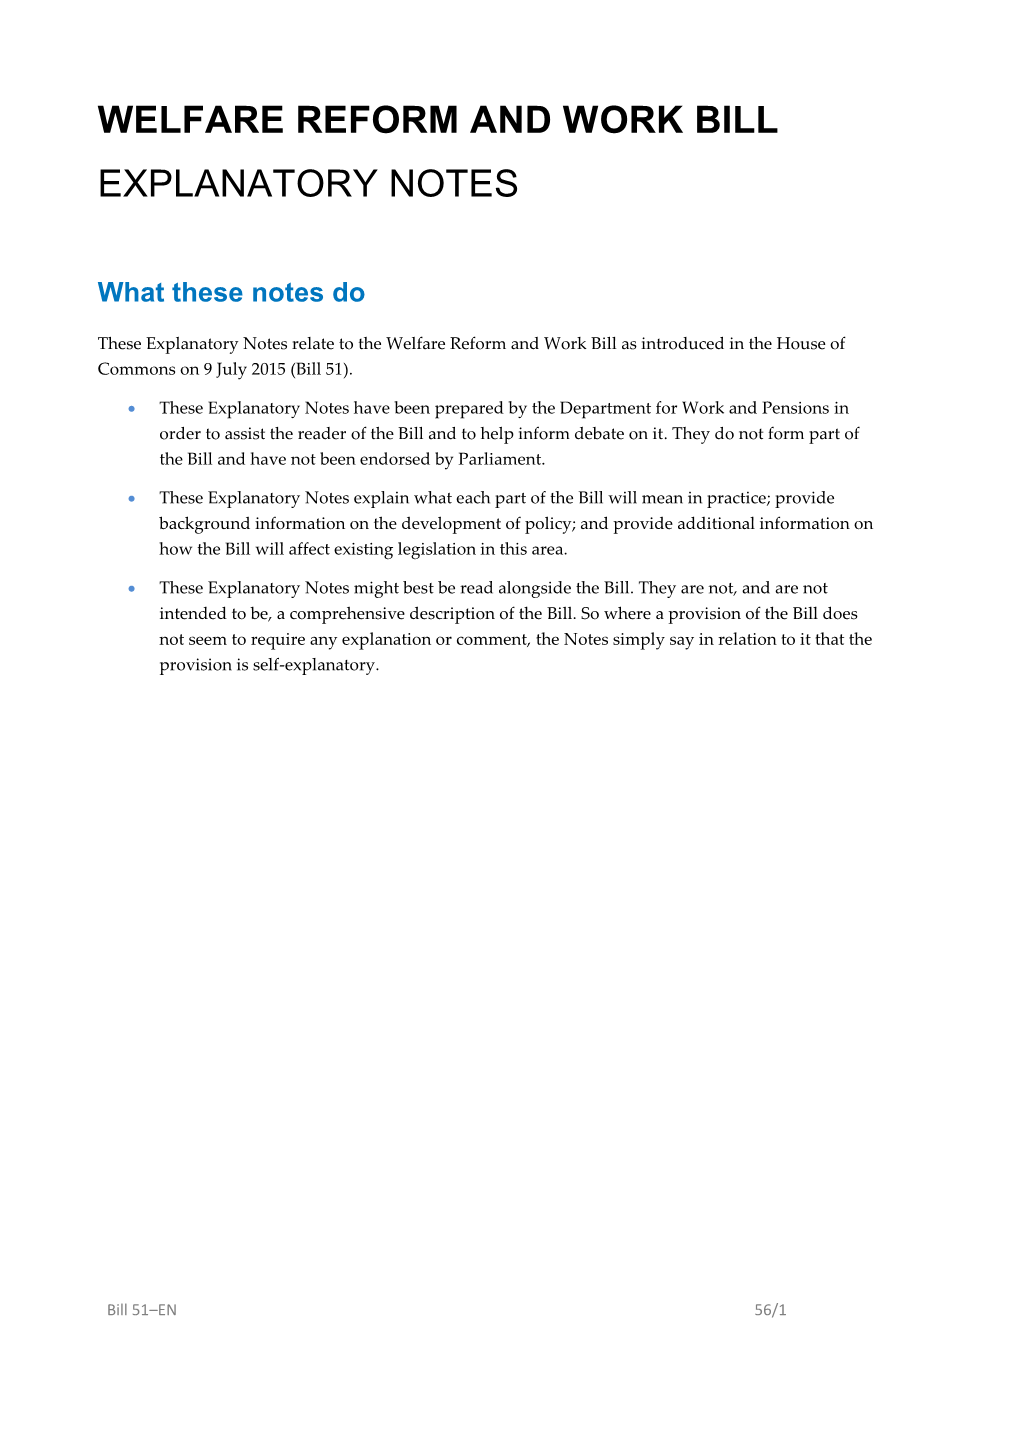 Welfare Reform and Work Bill Explanatory Notes